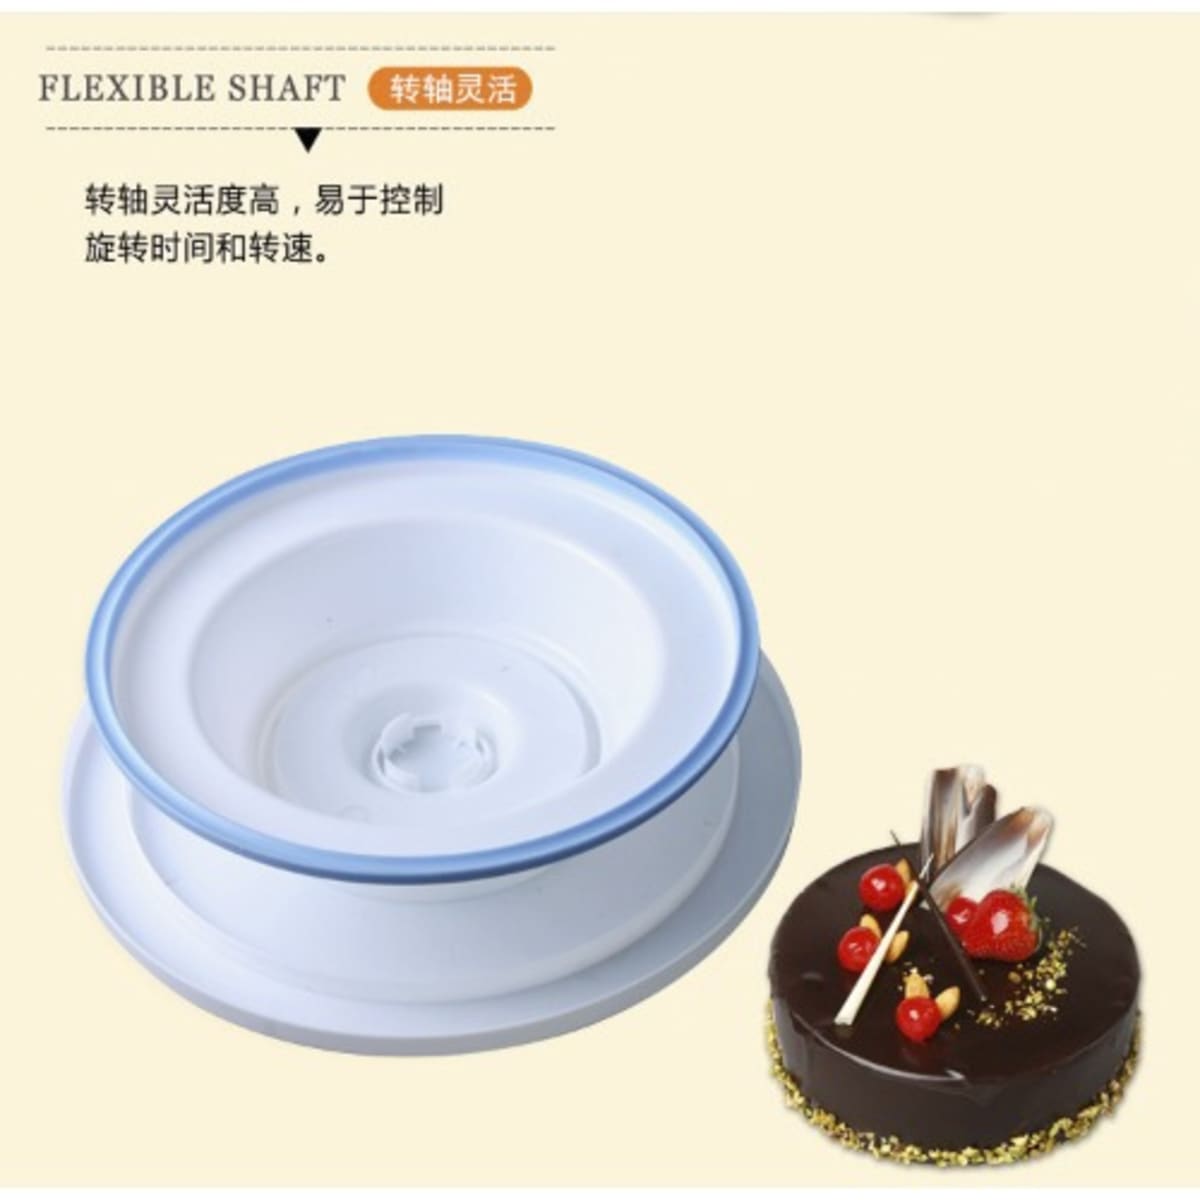 Wooden Cake Turntable For Decorating And Icing